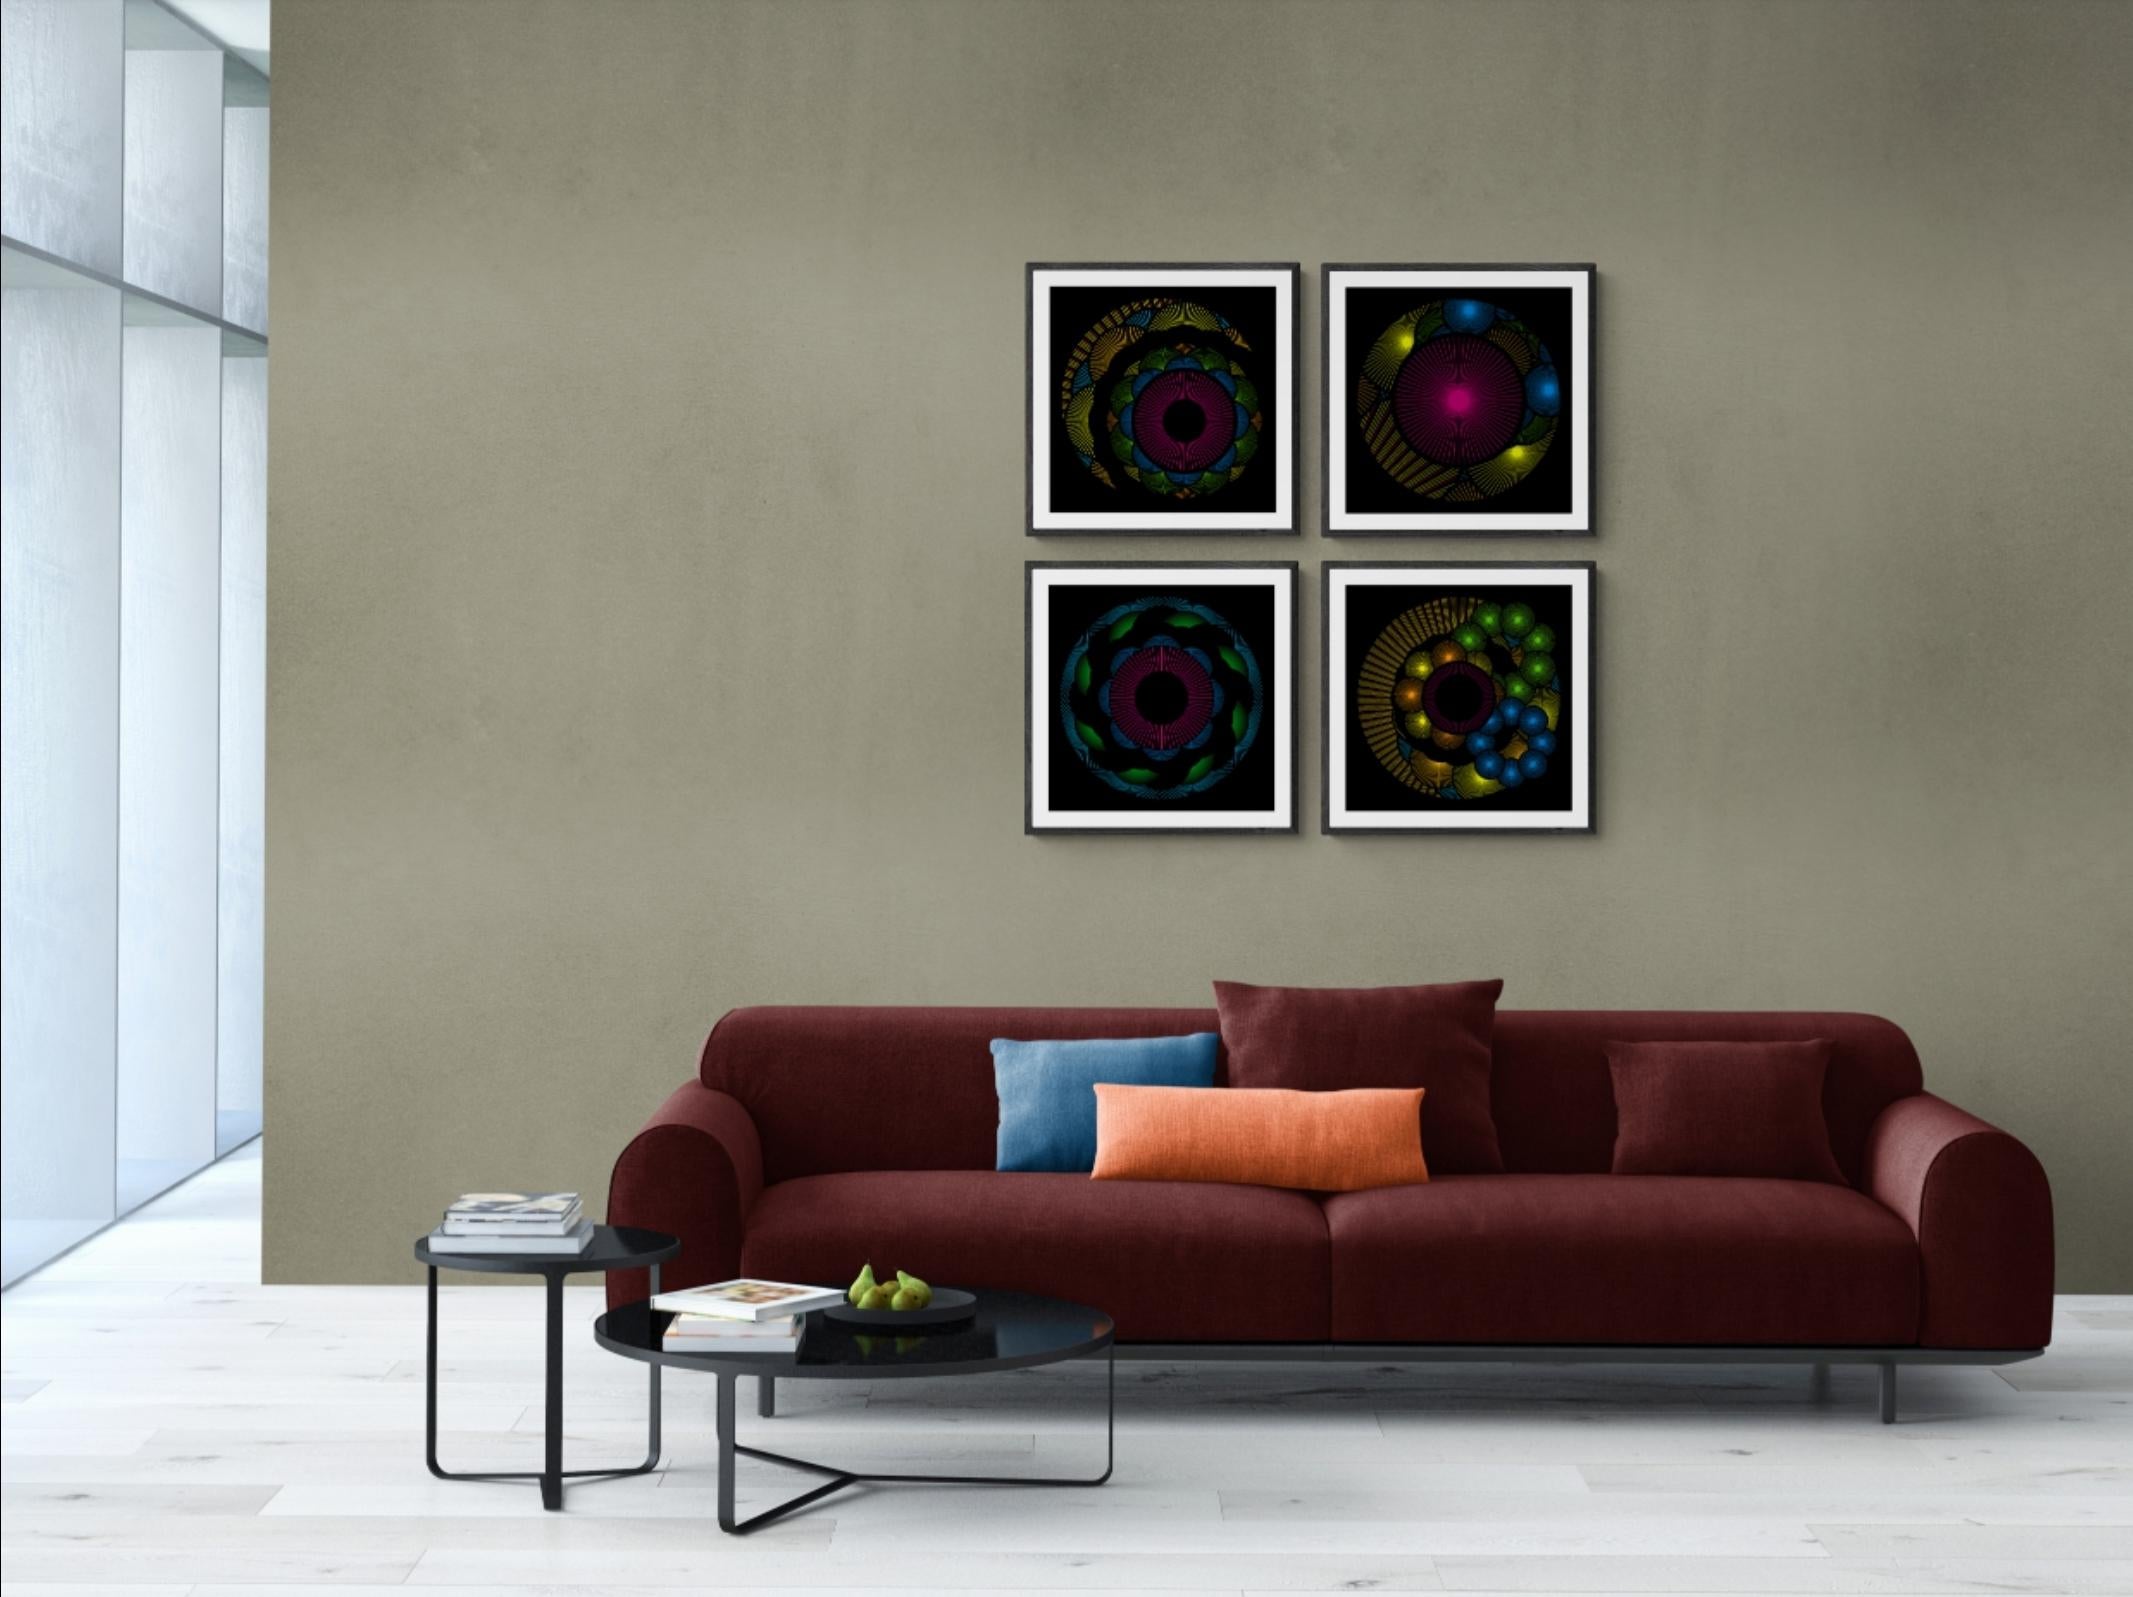 Nebulosa 6 - Abstract Geometric Print by Julio Campos